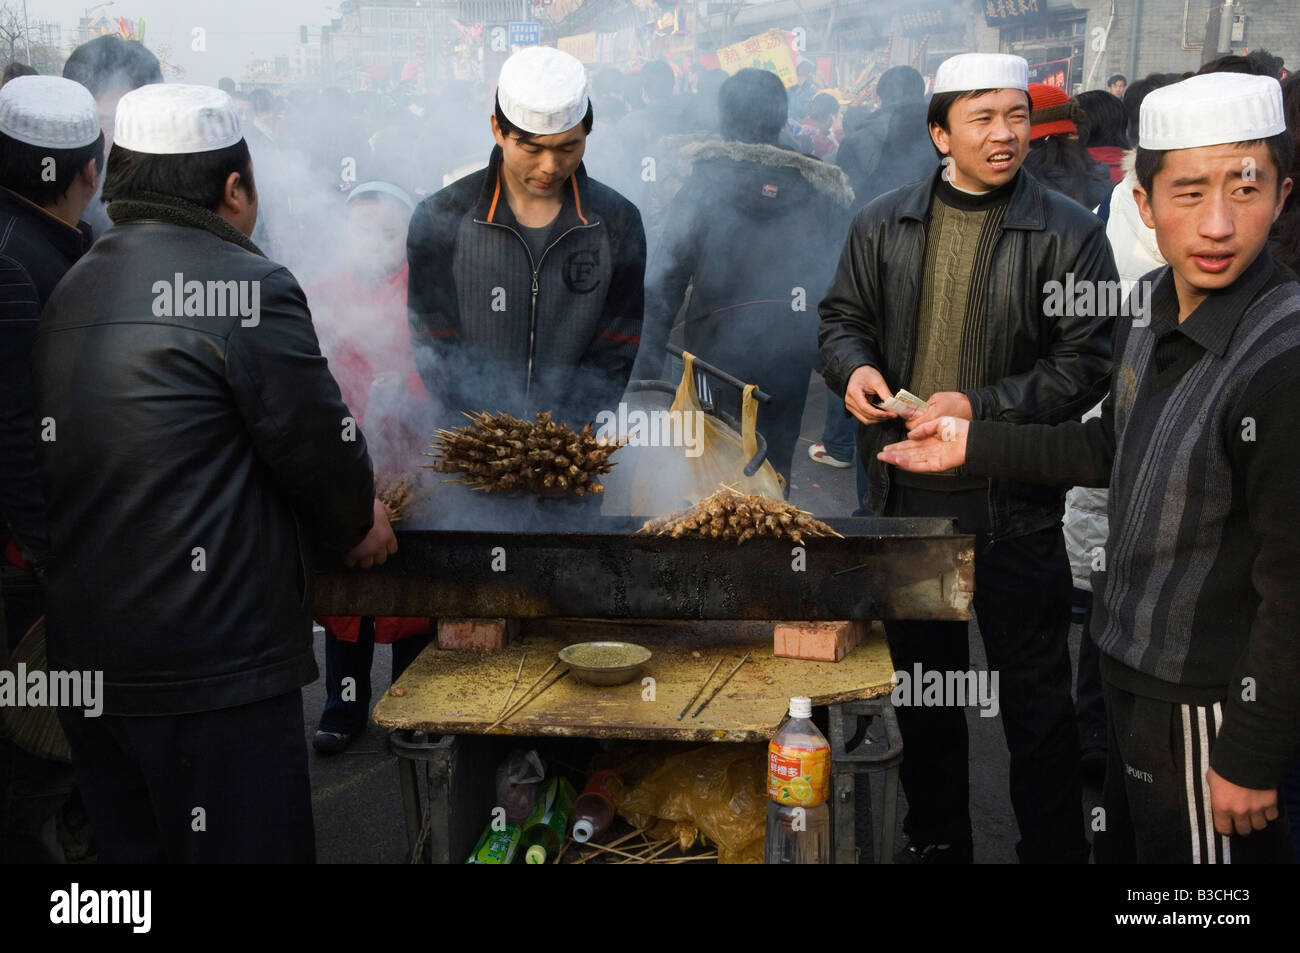 China, Beijing. Chinese New Year Spring Festival - Changdian street fair - Muslim stall vendors preparing food from Xingjiang in western China. Stock Photo